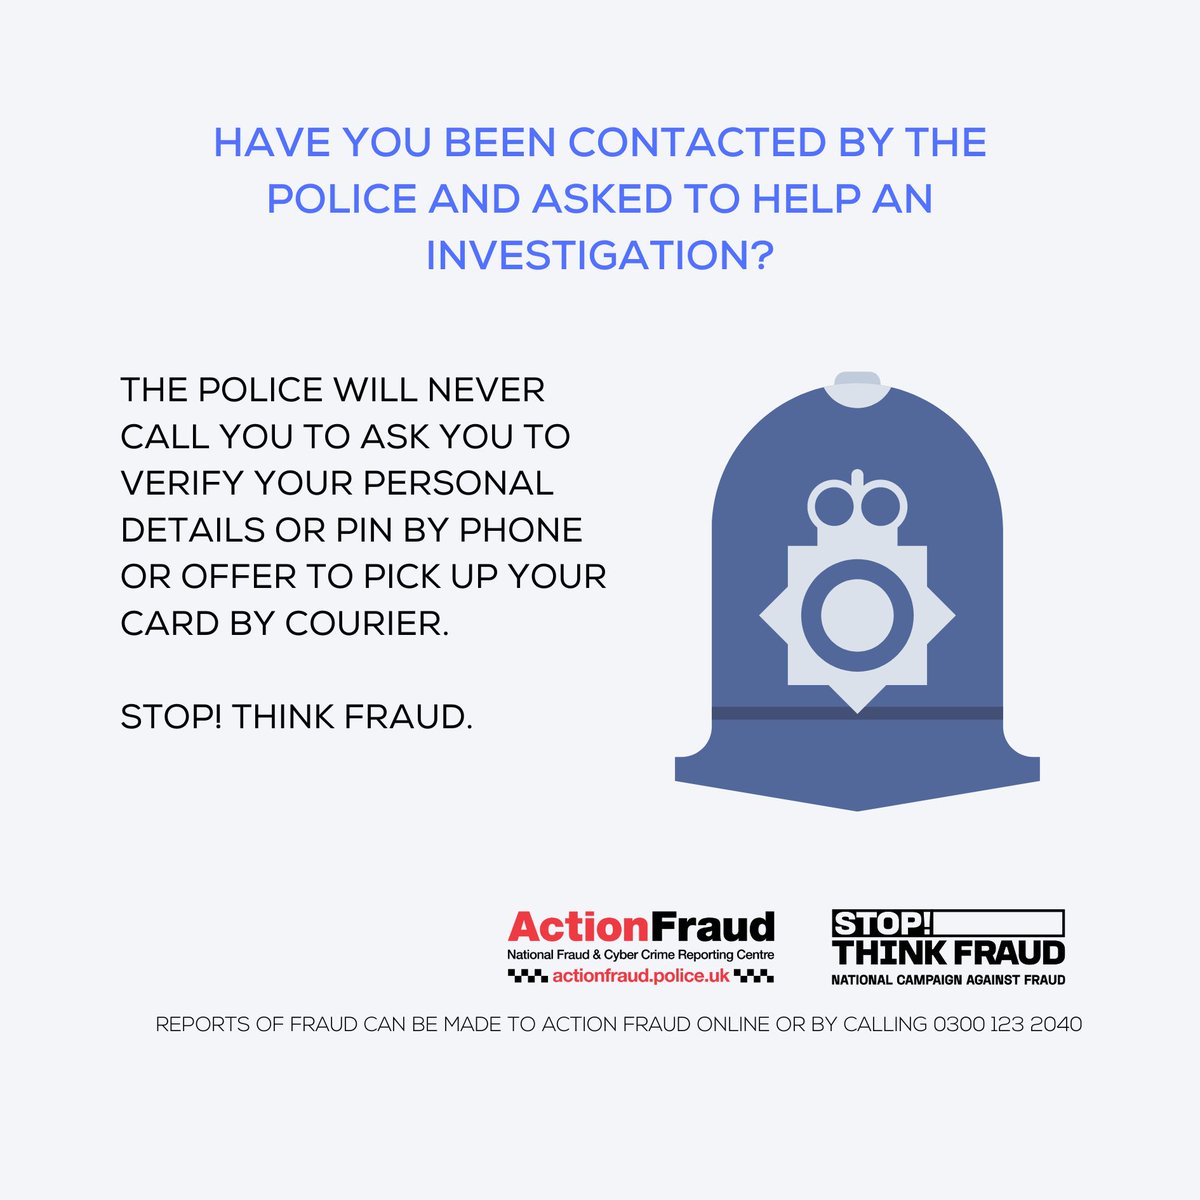 More than £28.7 million was lost to courier fraud in the UK last year with people in their 80s the most likely to be targeted. Courier fraud criminals will call victims pretending to be from the police or from their bank. You can read more here: bit.ly/3wVwfKj